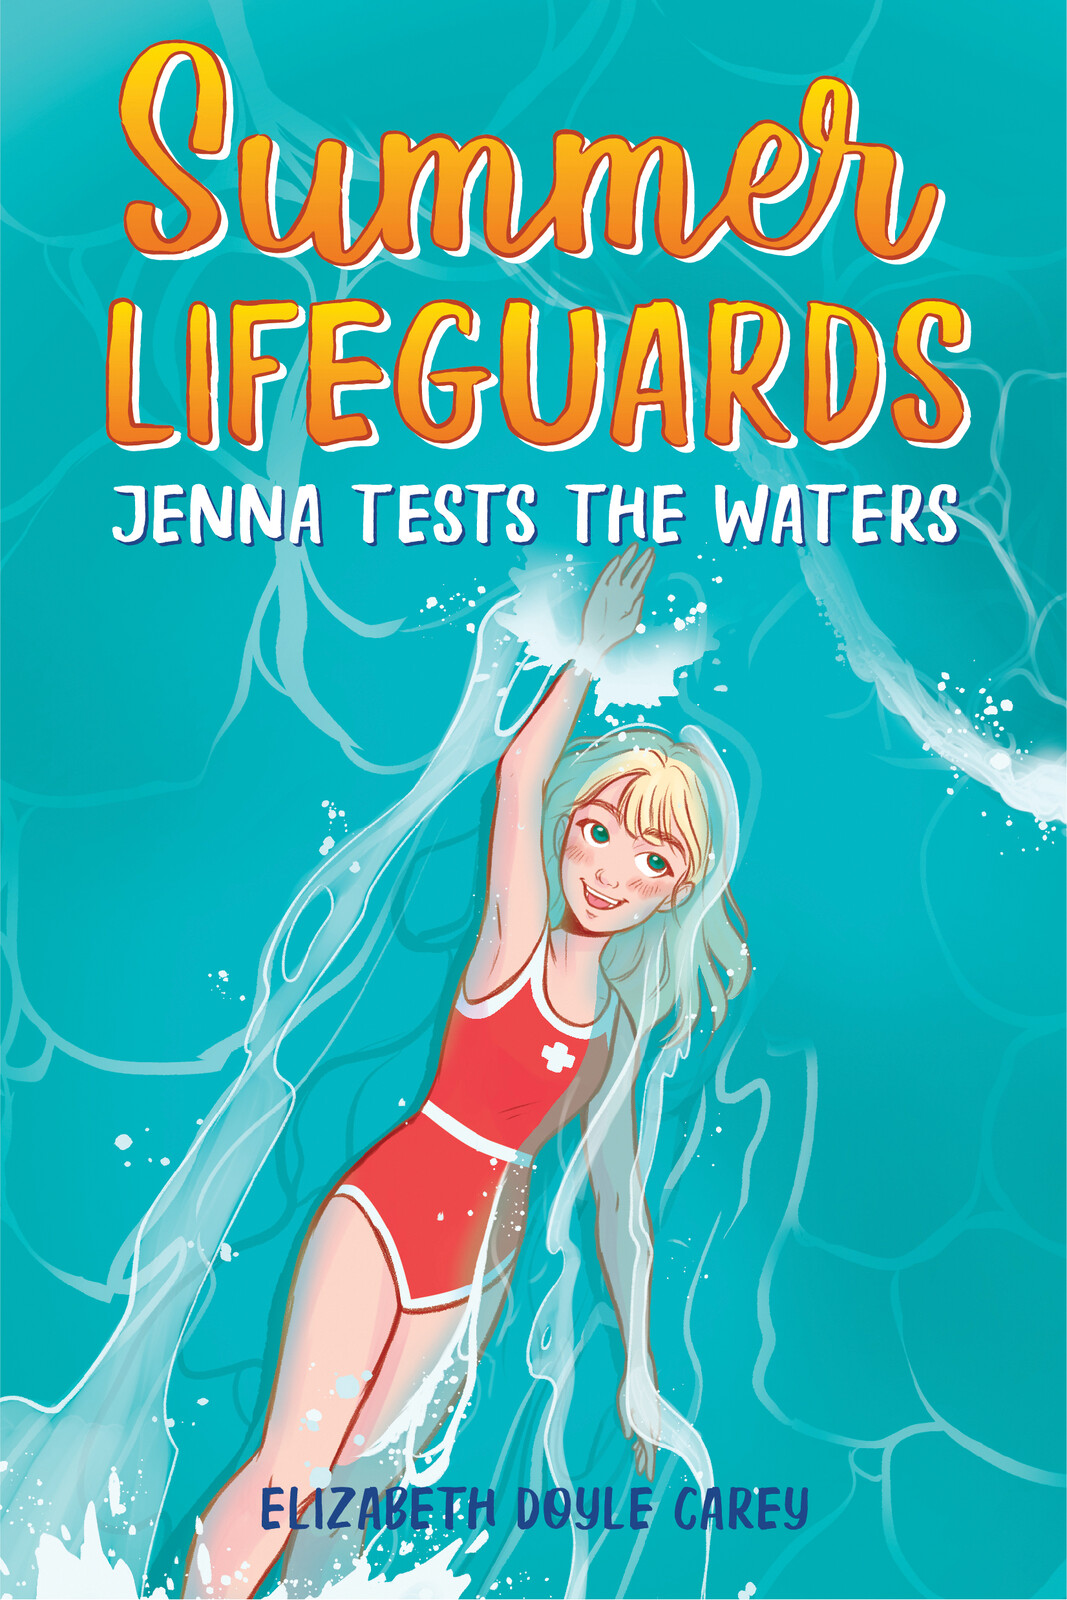 Cover for SUMMER LIFEGUARDS. JENNA TESTS THE WATERS (2021).
Written by Elizabeth Doyle Carey.